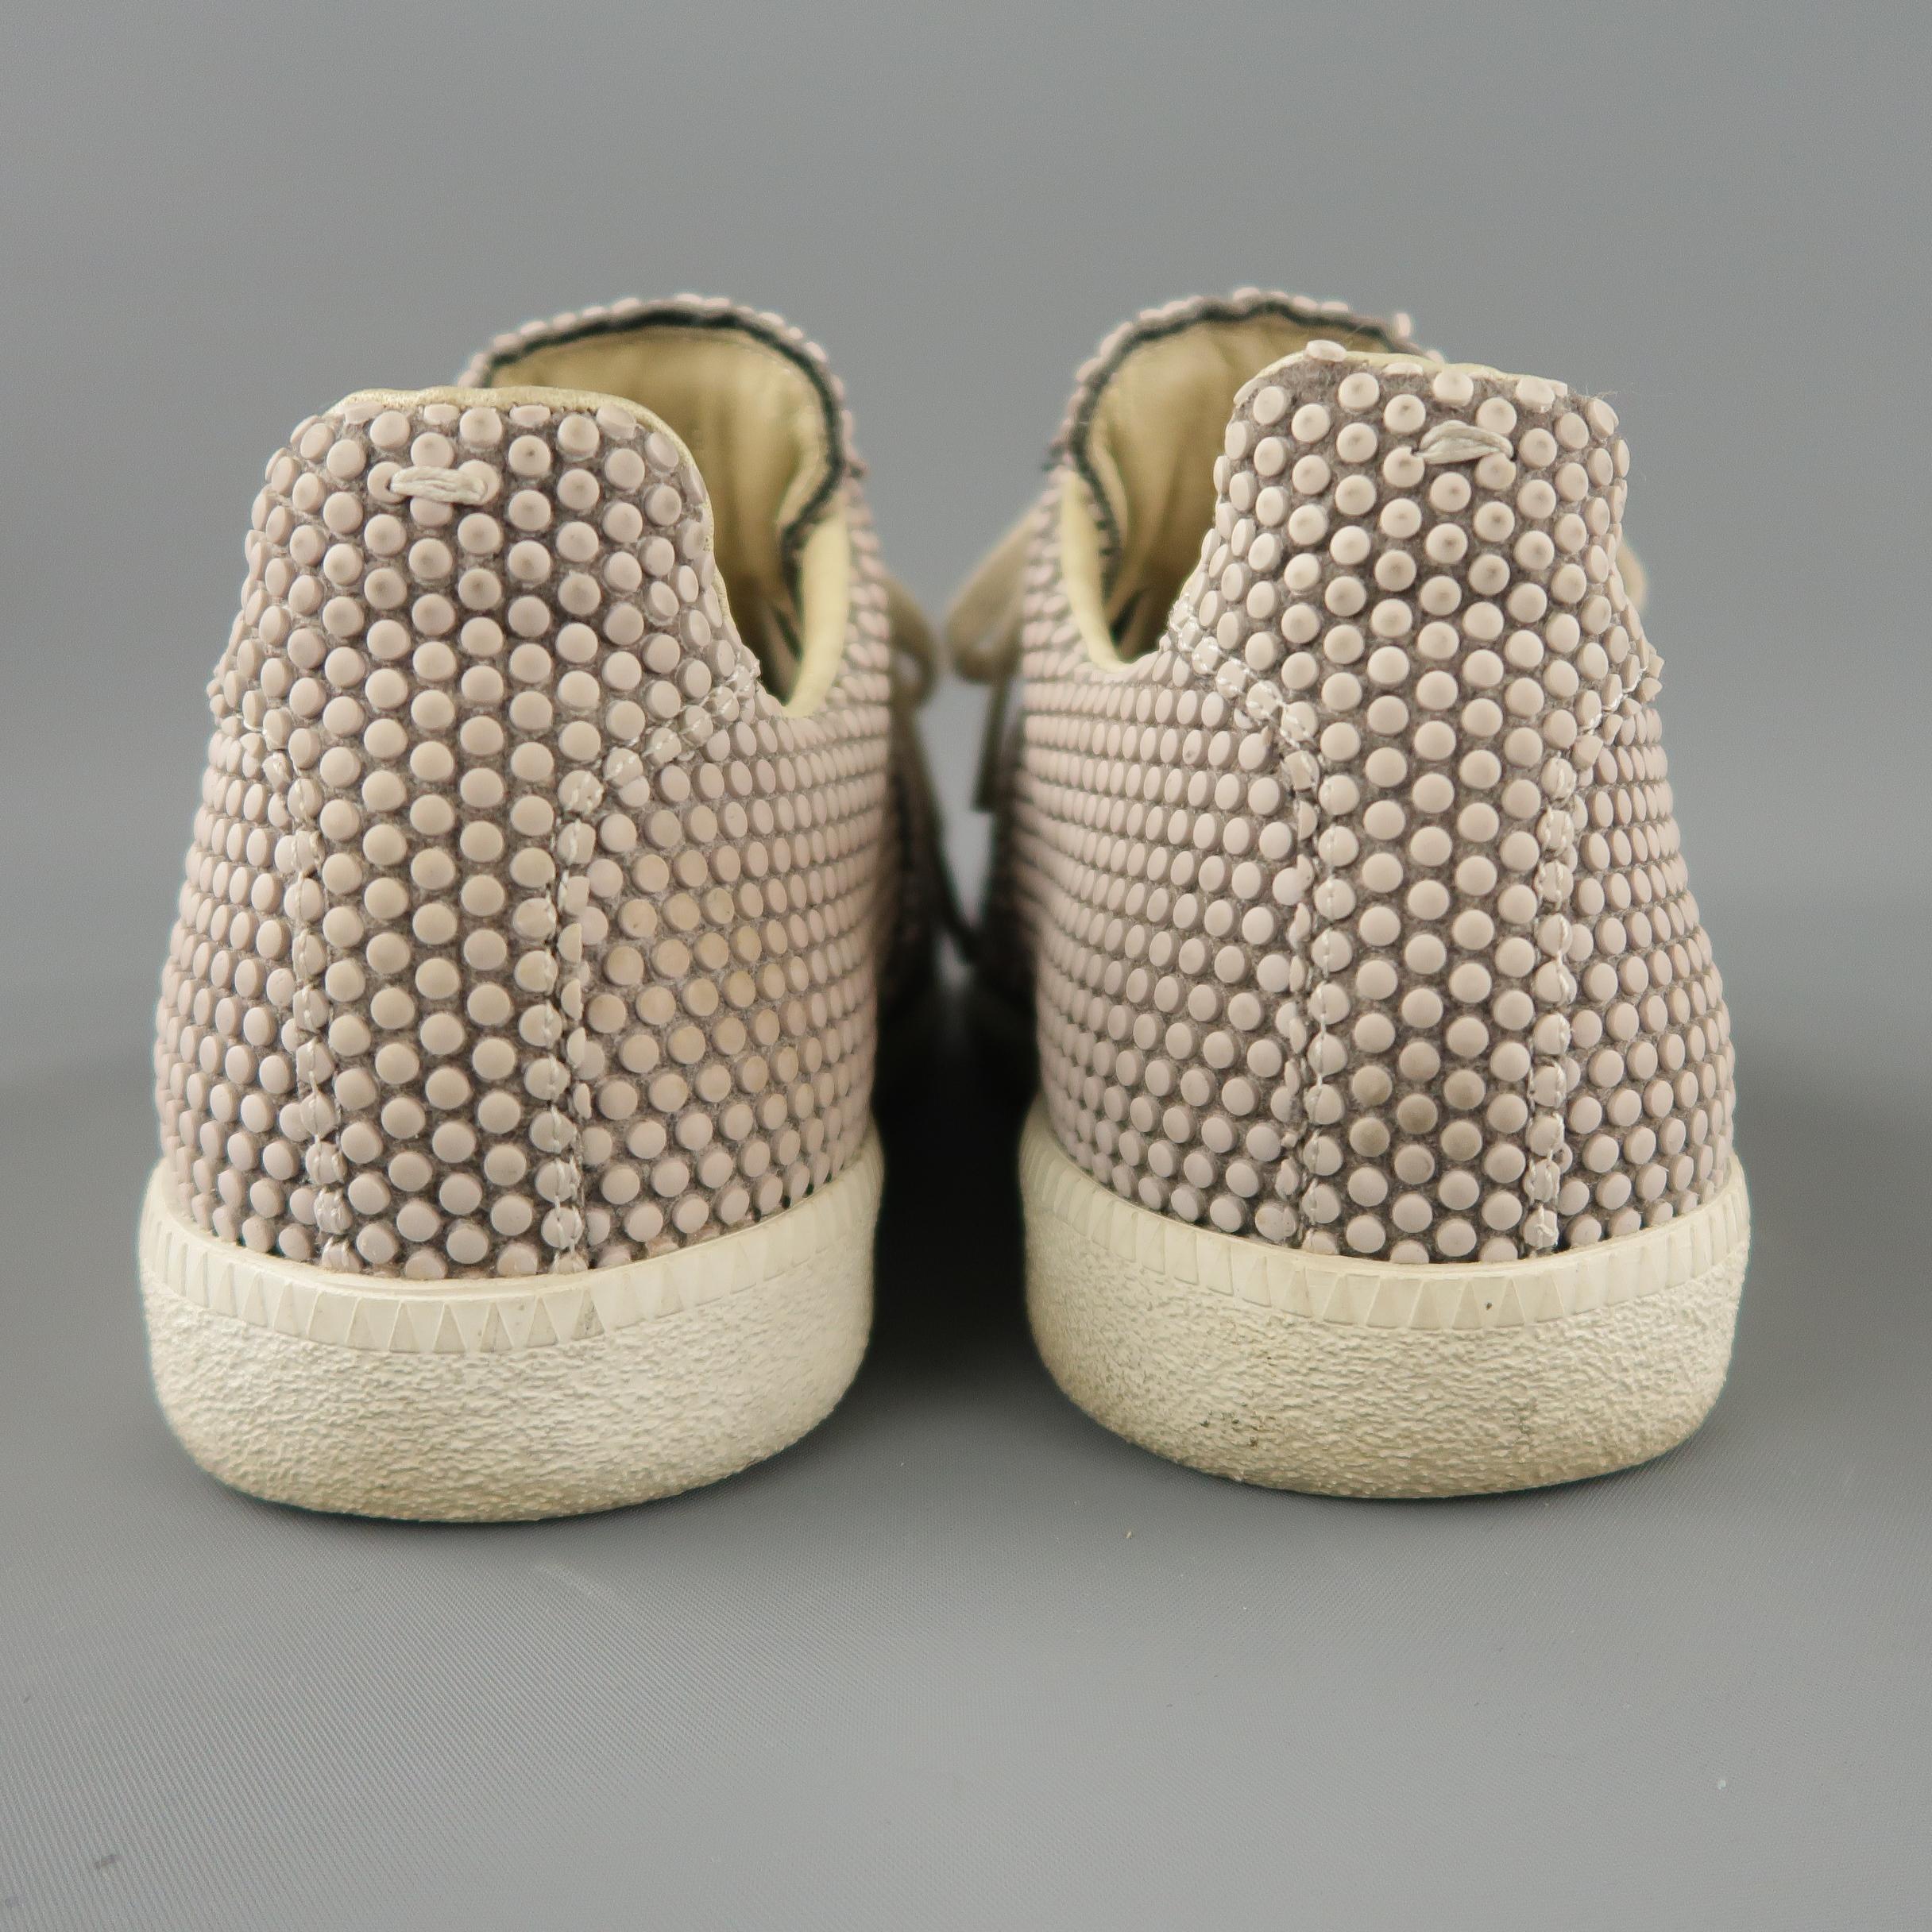 MAISON MARTIN MARGIELA REPLICA low top sneaker comes in a taupe dot canvas pattern featuring a rubber sole. Made in Italy.
 
Excellent Pre-Owned Condition.
Marked: 41
 
Measurements:
 
Width: 4 in.
Length: 11 in.